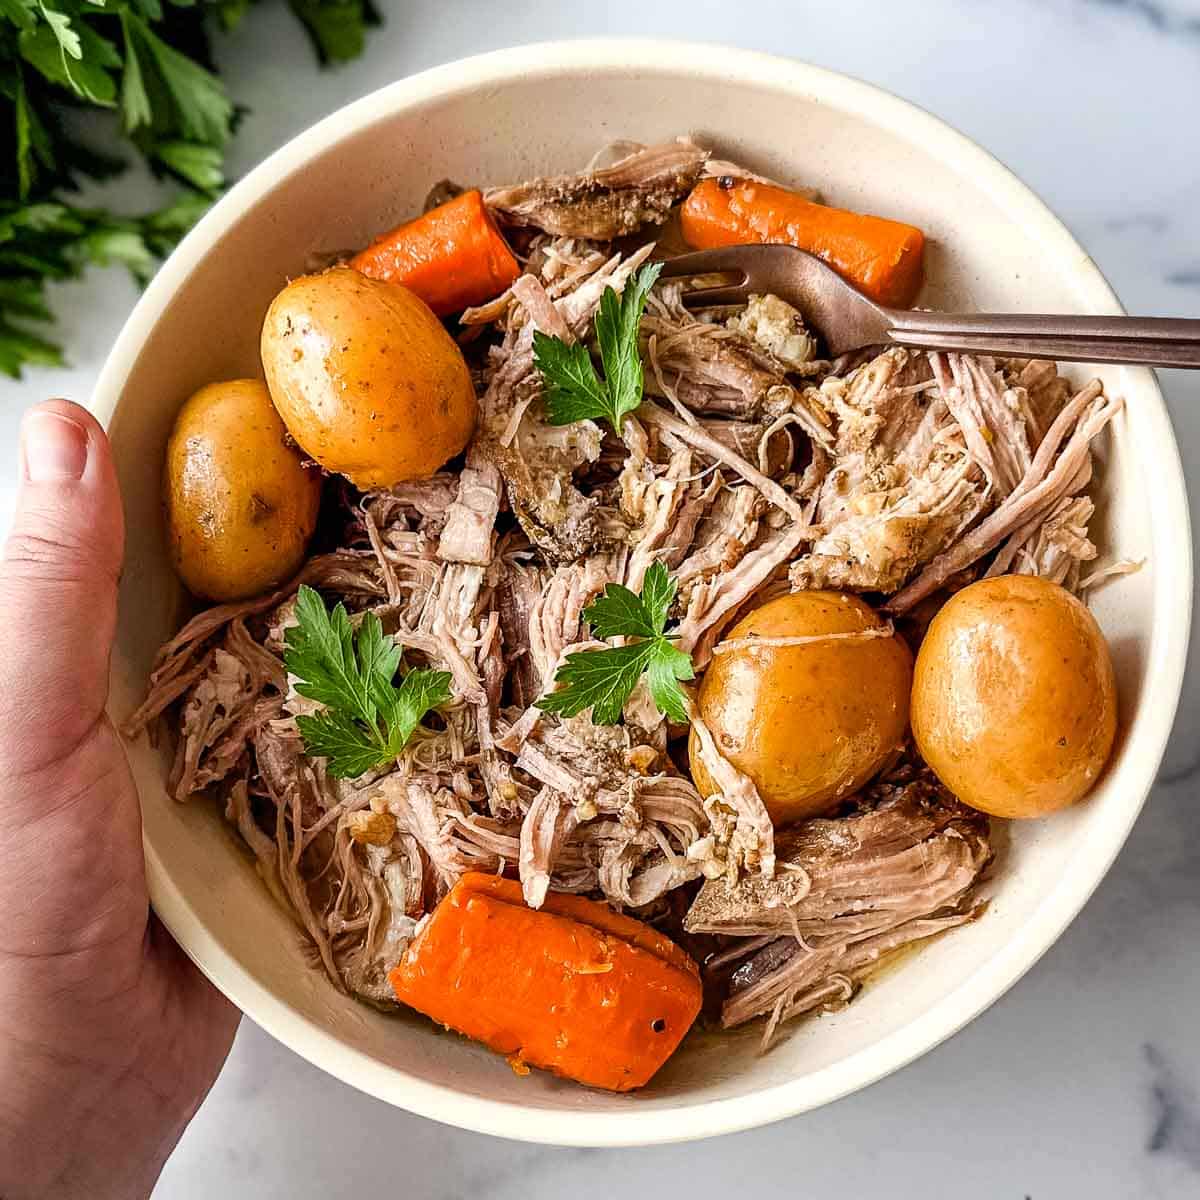 A hand holding a bowl of pulled pork with potatoes and carrots.